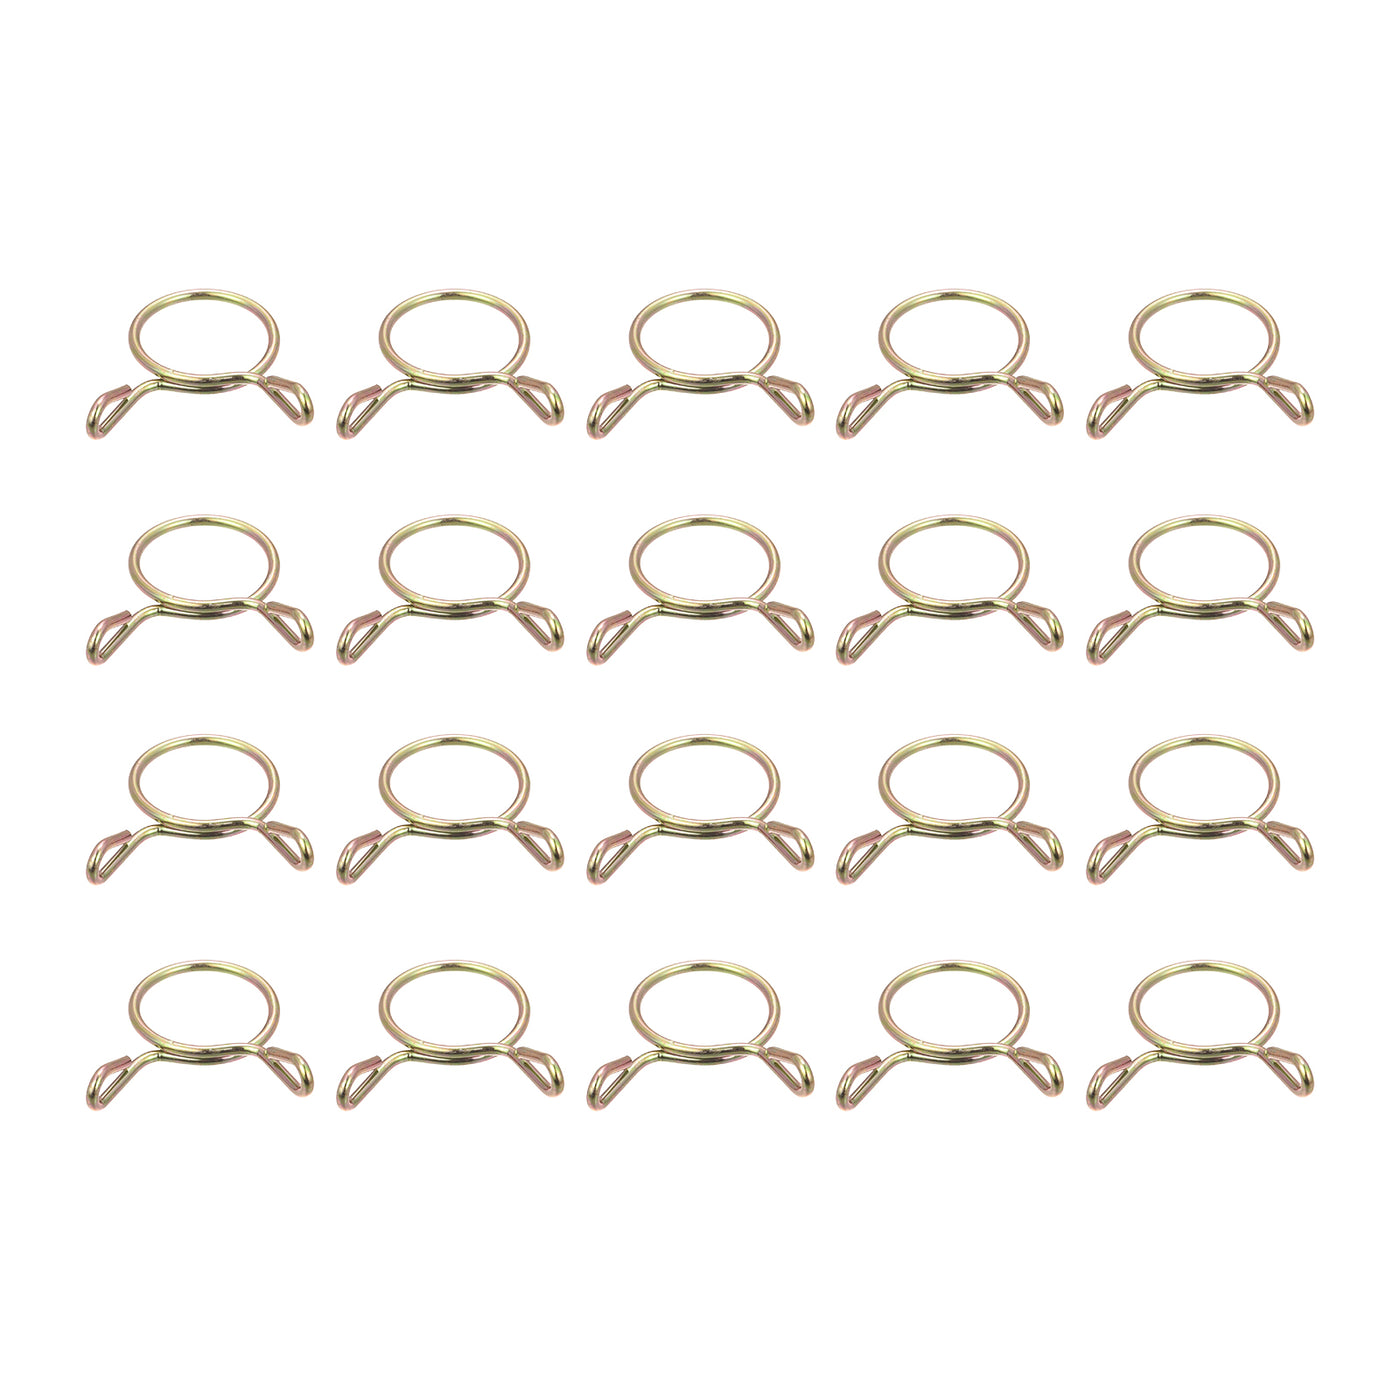 Uxcell Uxcell Fuel Line Hose Clips, 100pcs 12mm 65Mn Steel Tubing Spring Clamps